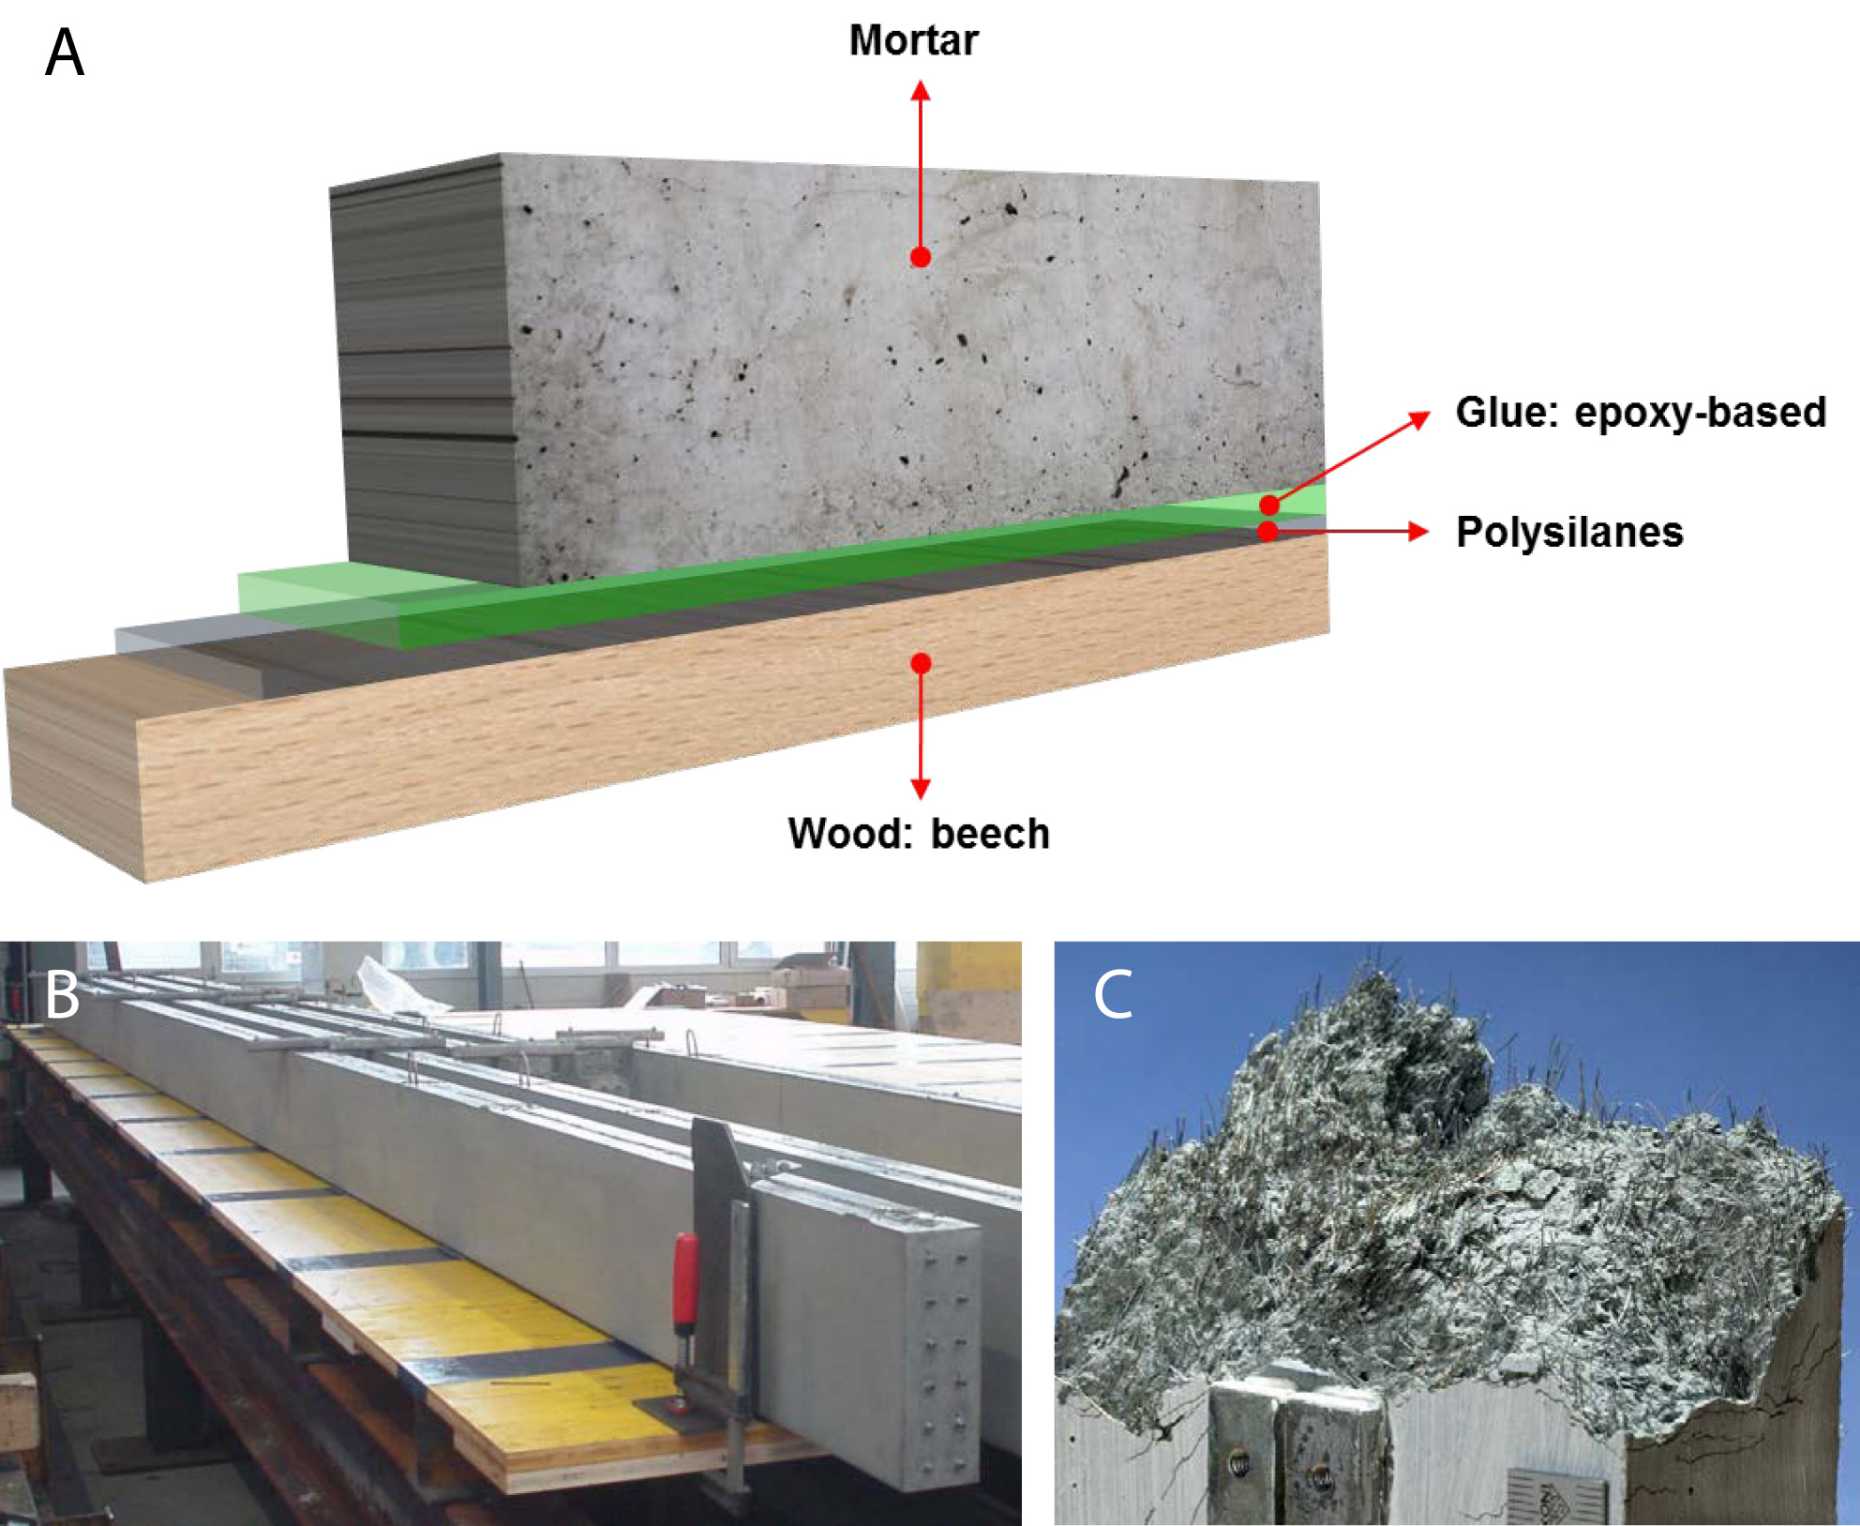 Enlarged view: Image A shows a wood-concrete composite flooring structure (source: Frangi); image B. shows a CFRP prestressed HPC facade beam (source: Krause); image C. shows ultra high performance concrete with synthetic fibres (UHPFRC) (source: Denarie).